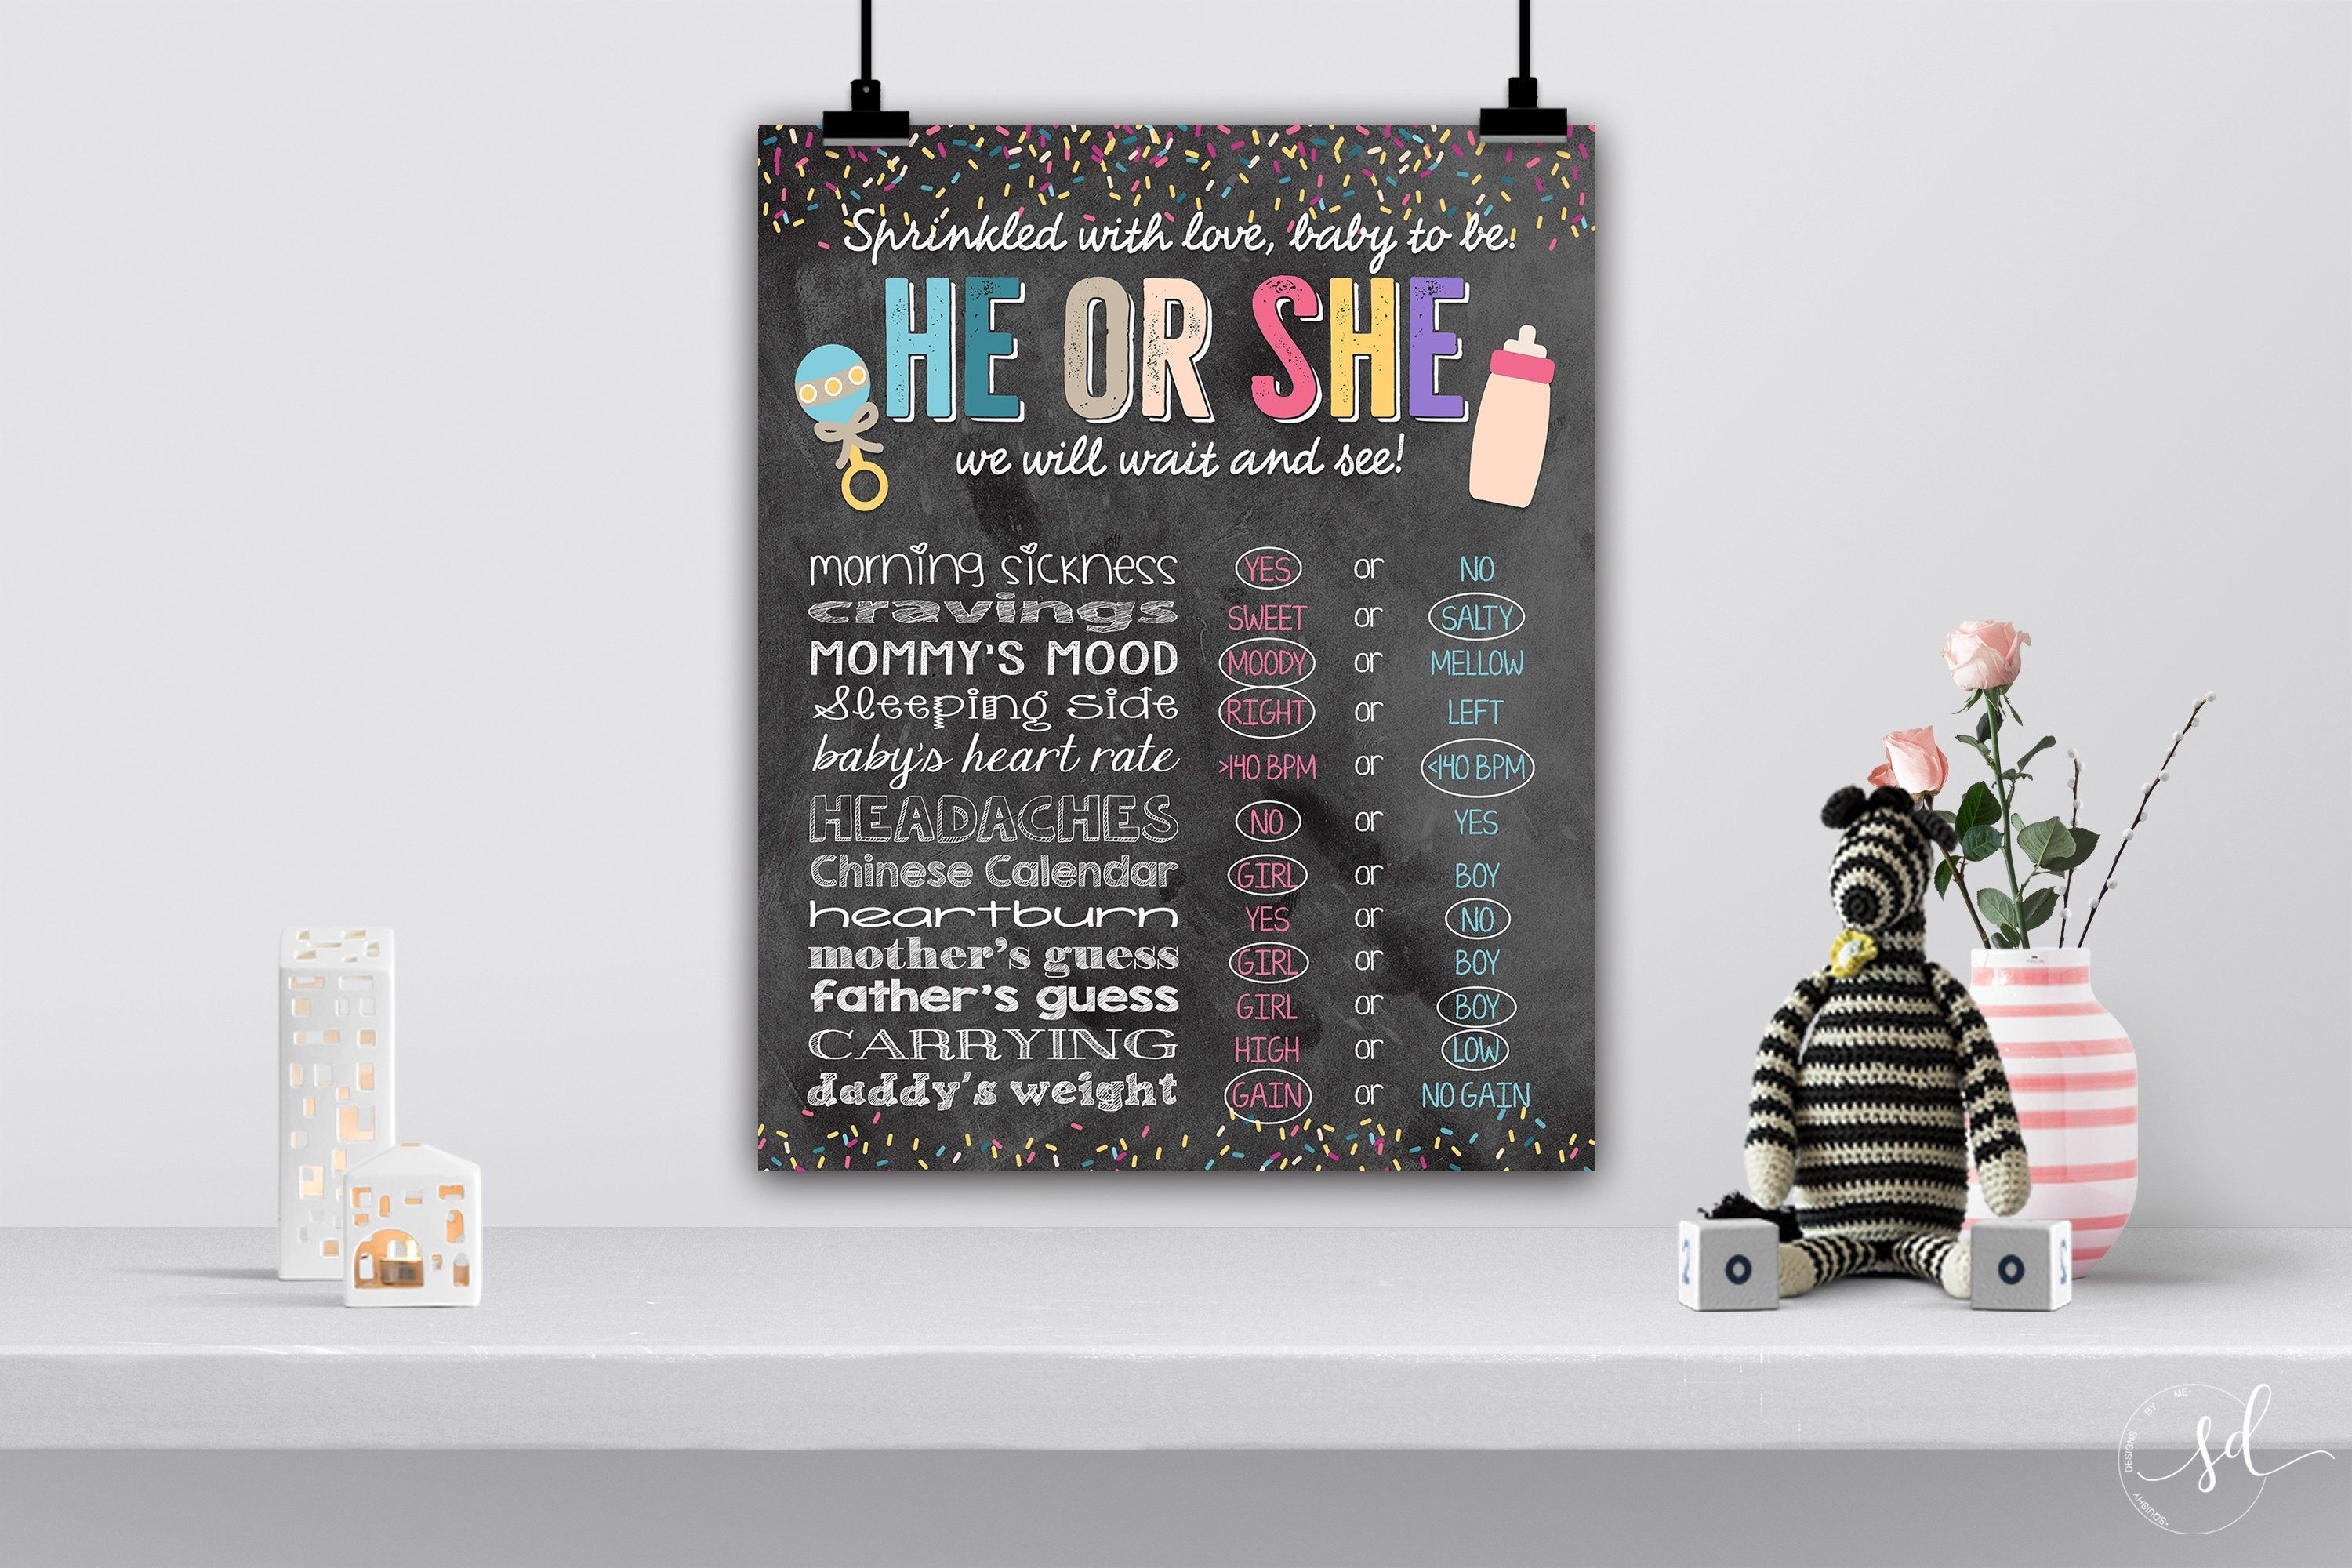 Old Wives Tales Sign Baby Shower Instant Download Customizable Baby Gender Reveal Party Decorations Old Wives Tales Poster Sign